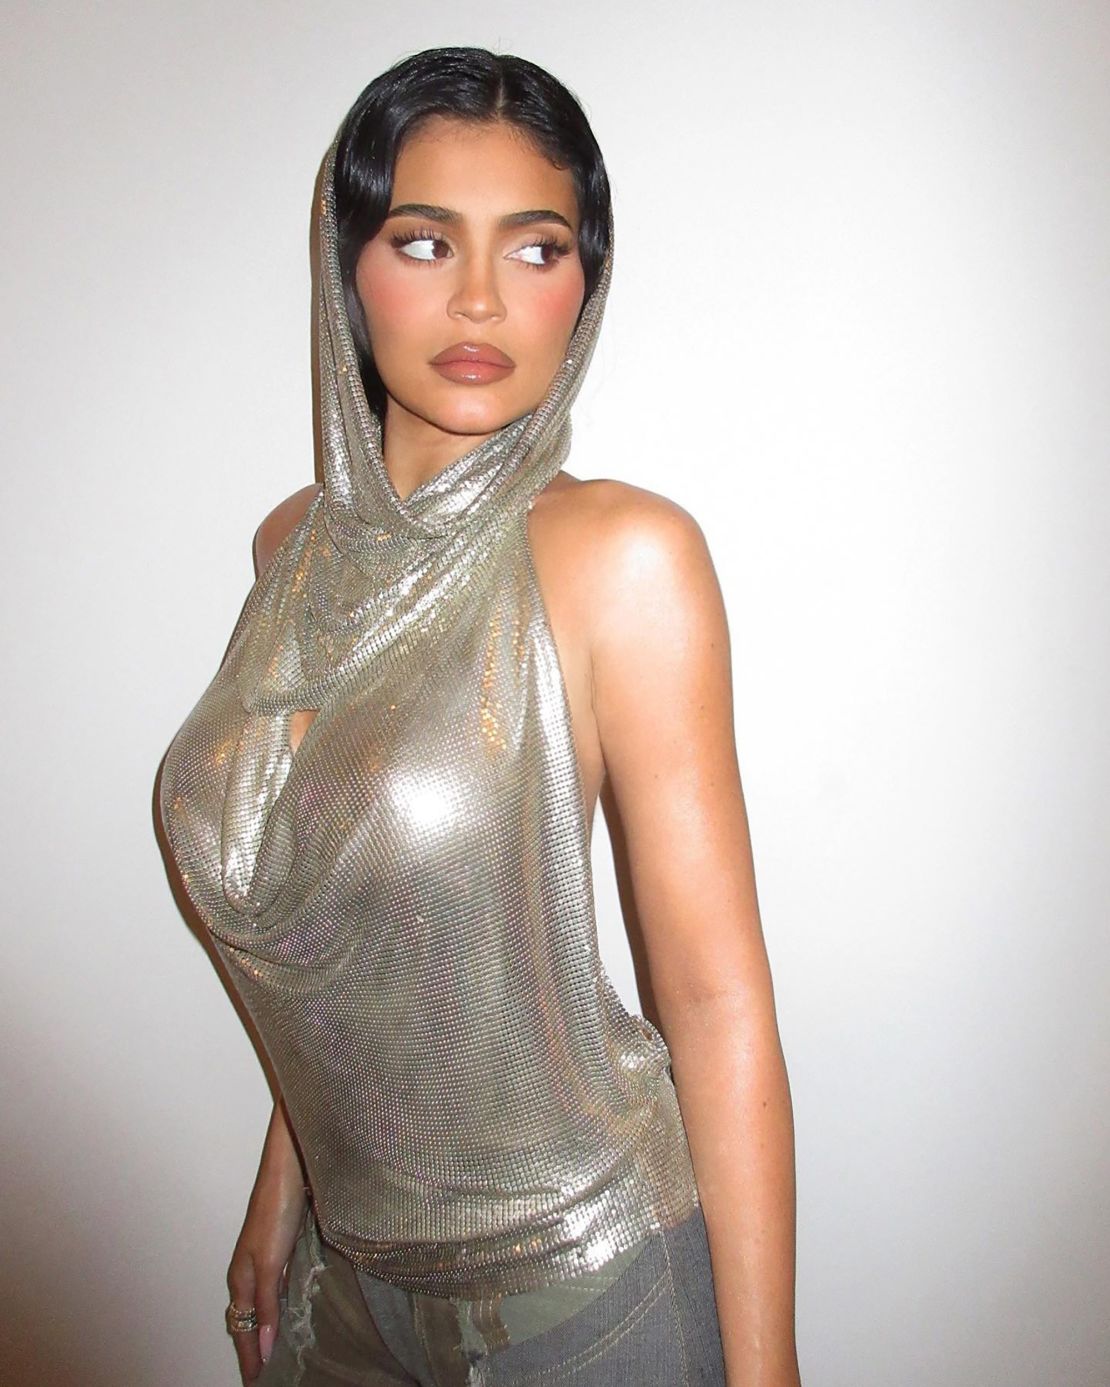 Kylie Jenner posted a photograph of her new outfit to Instagram, wearing a silver chainmail mesh hood.